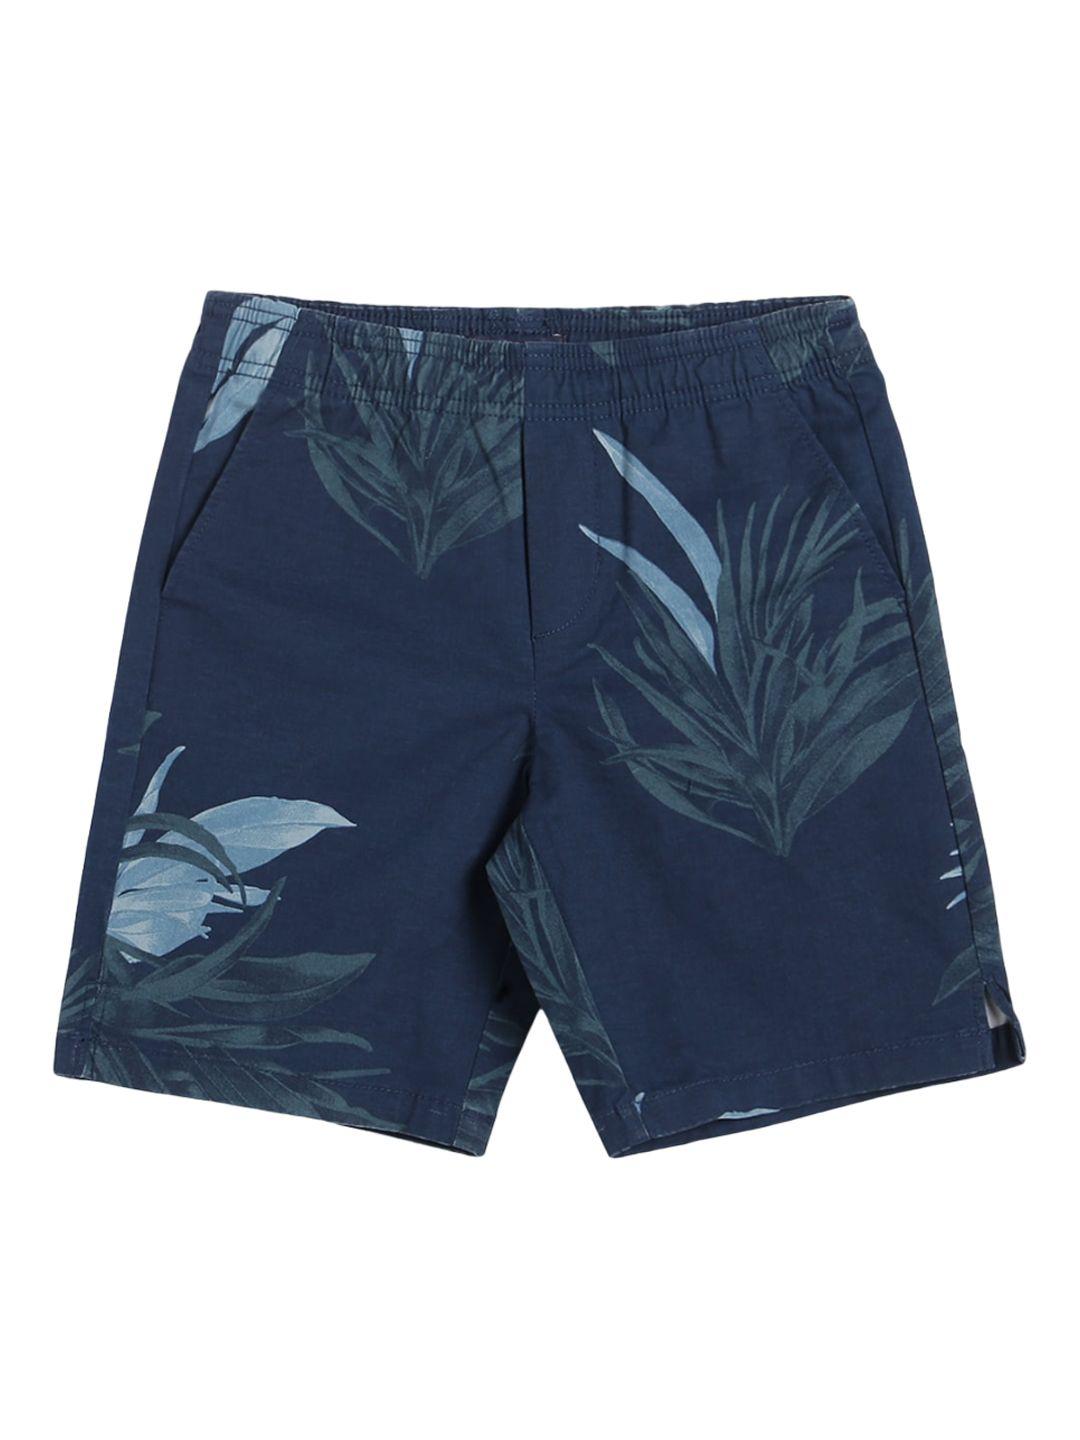 tommy-hilfiger-boys-mid-rise-tropical-printed-shorts